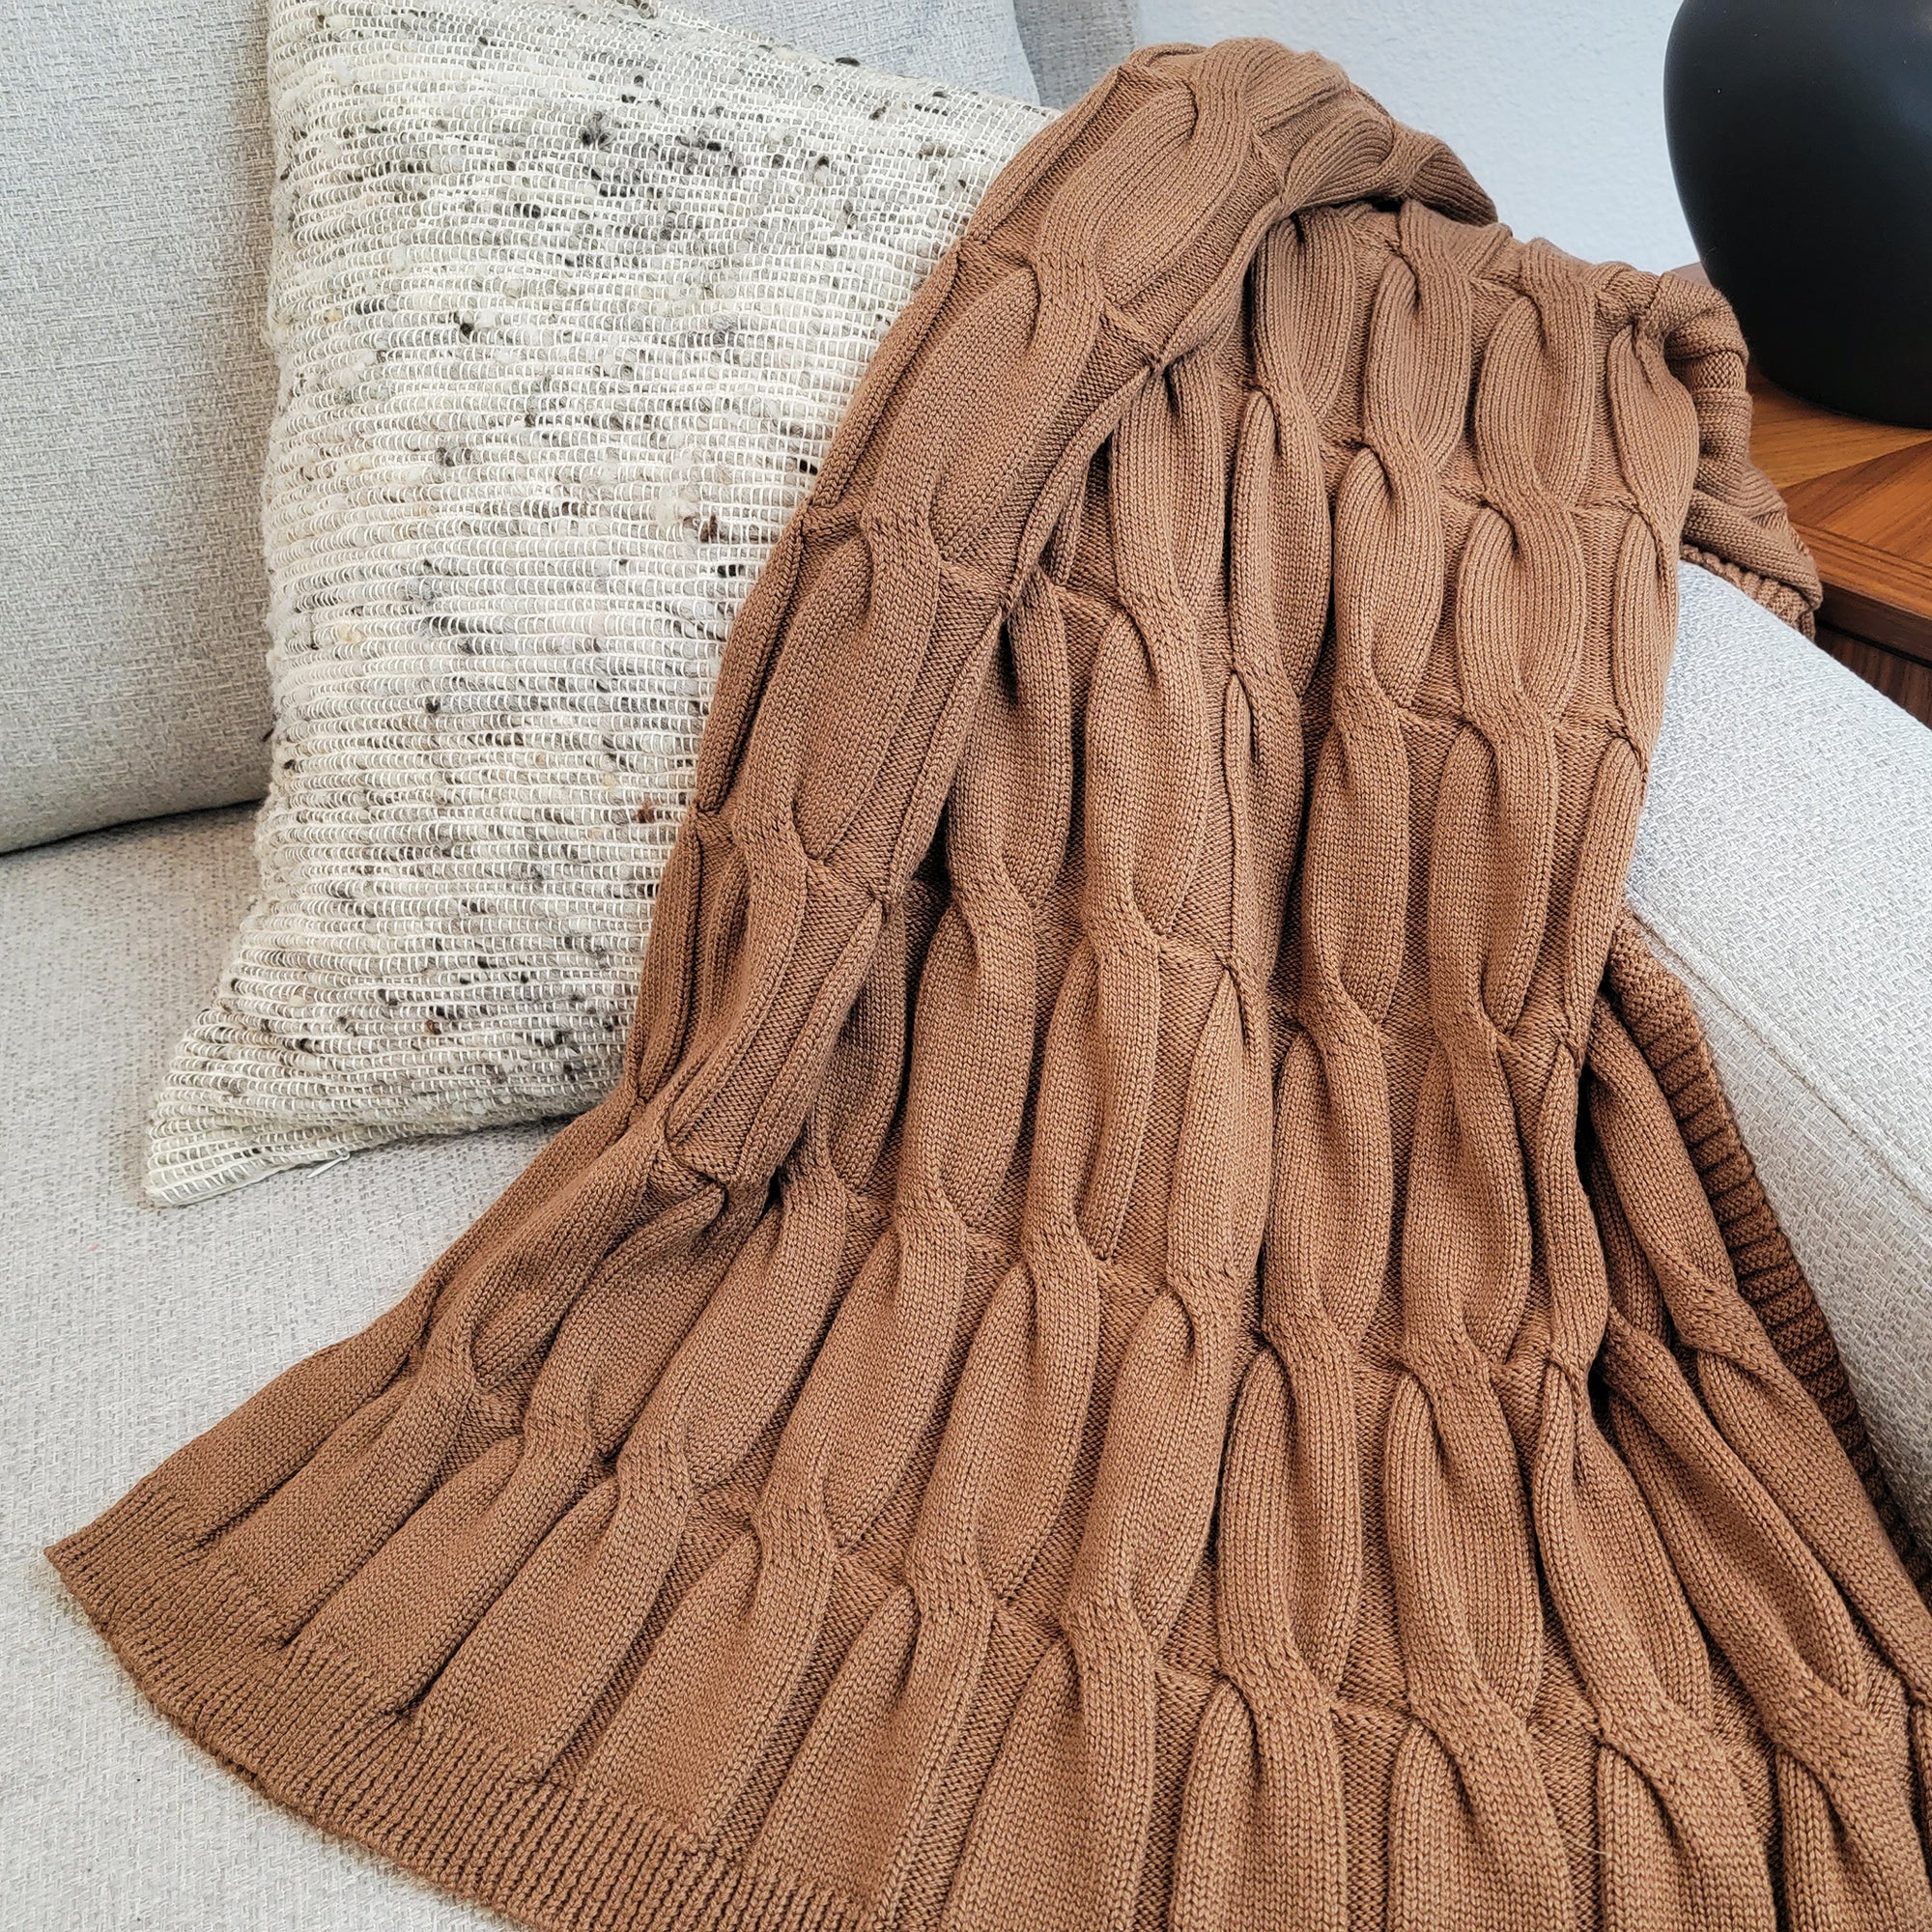 Grey Medellin pillow with Copper Bruce throw